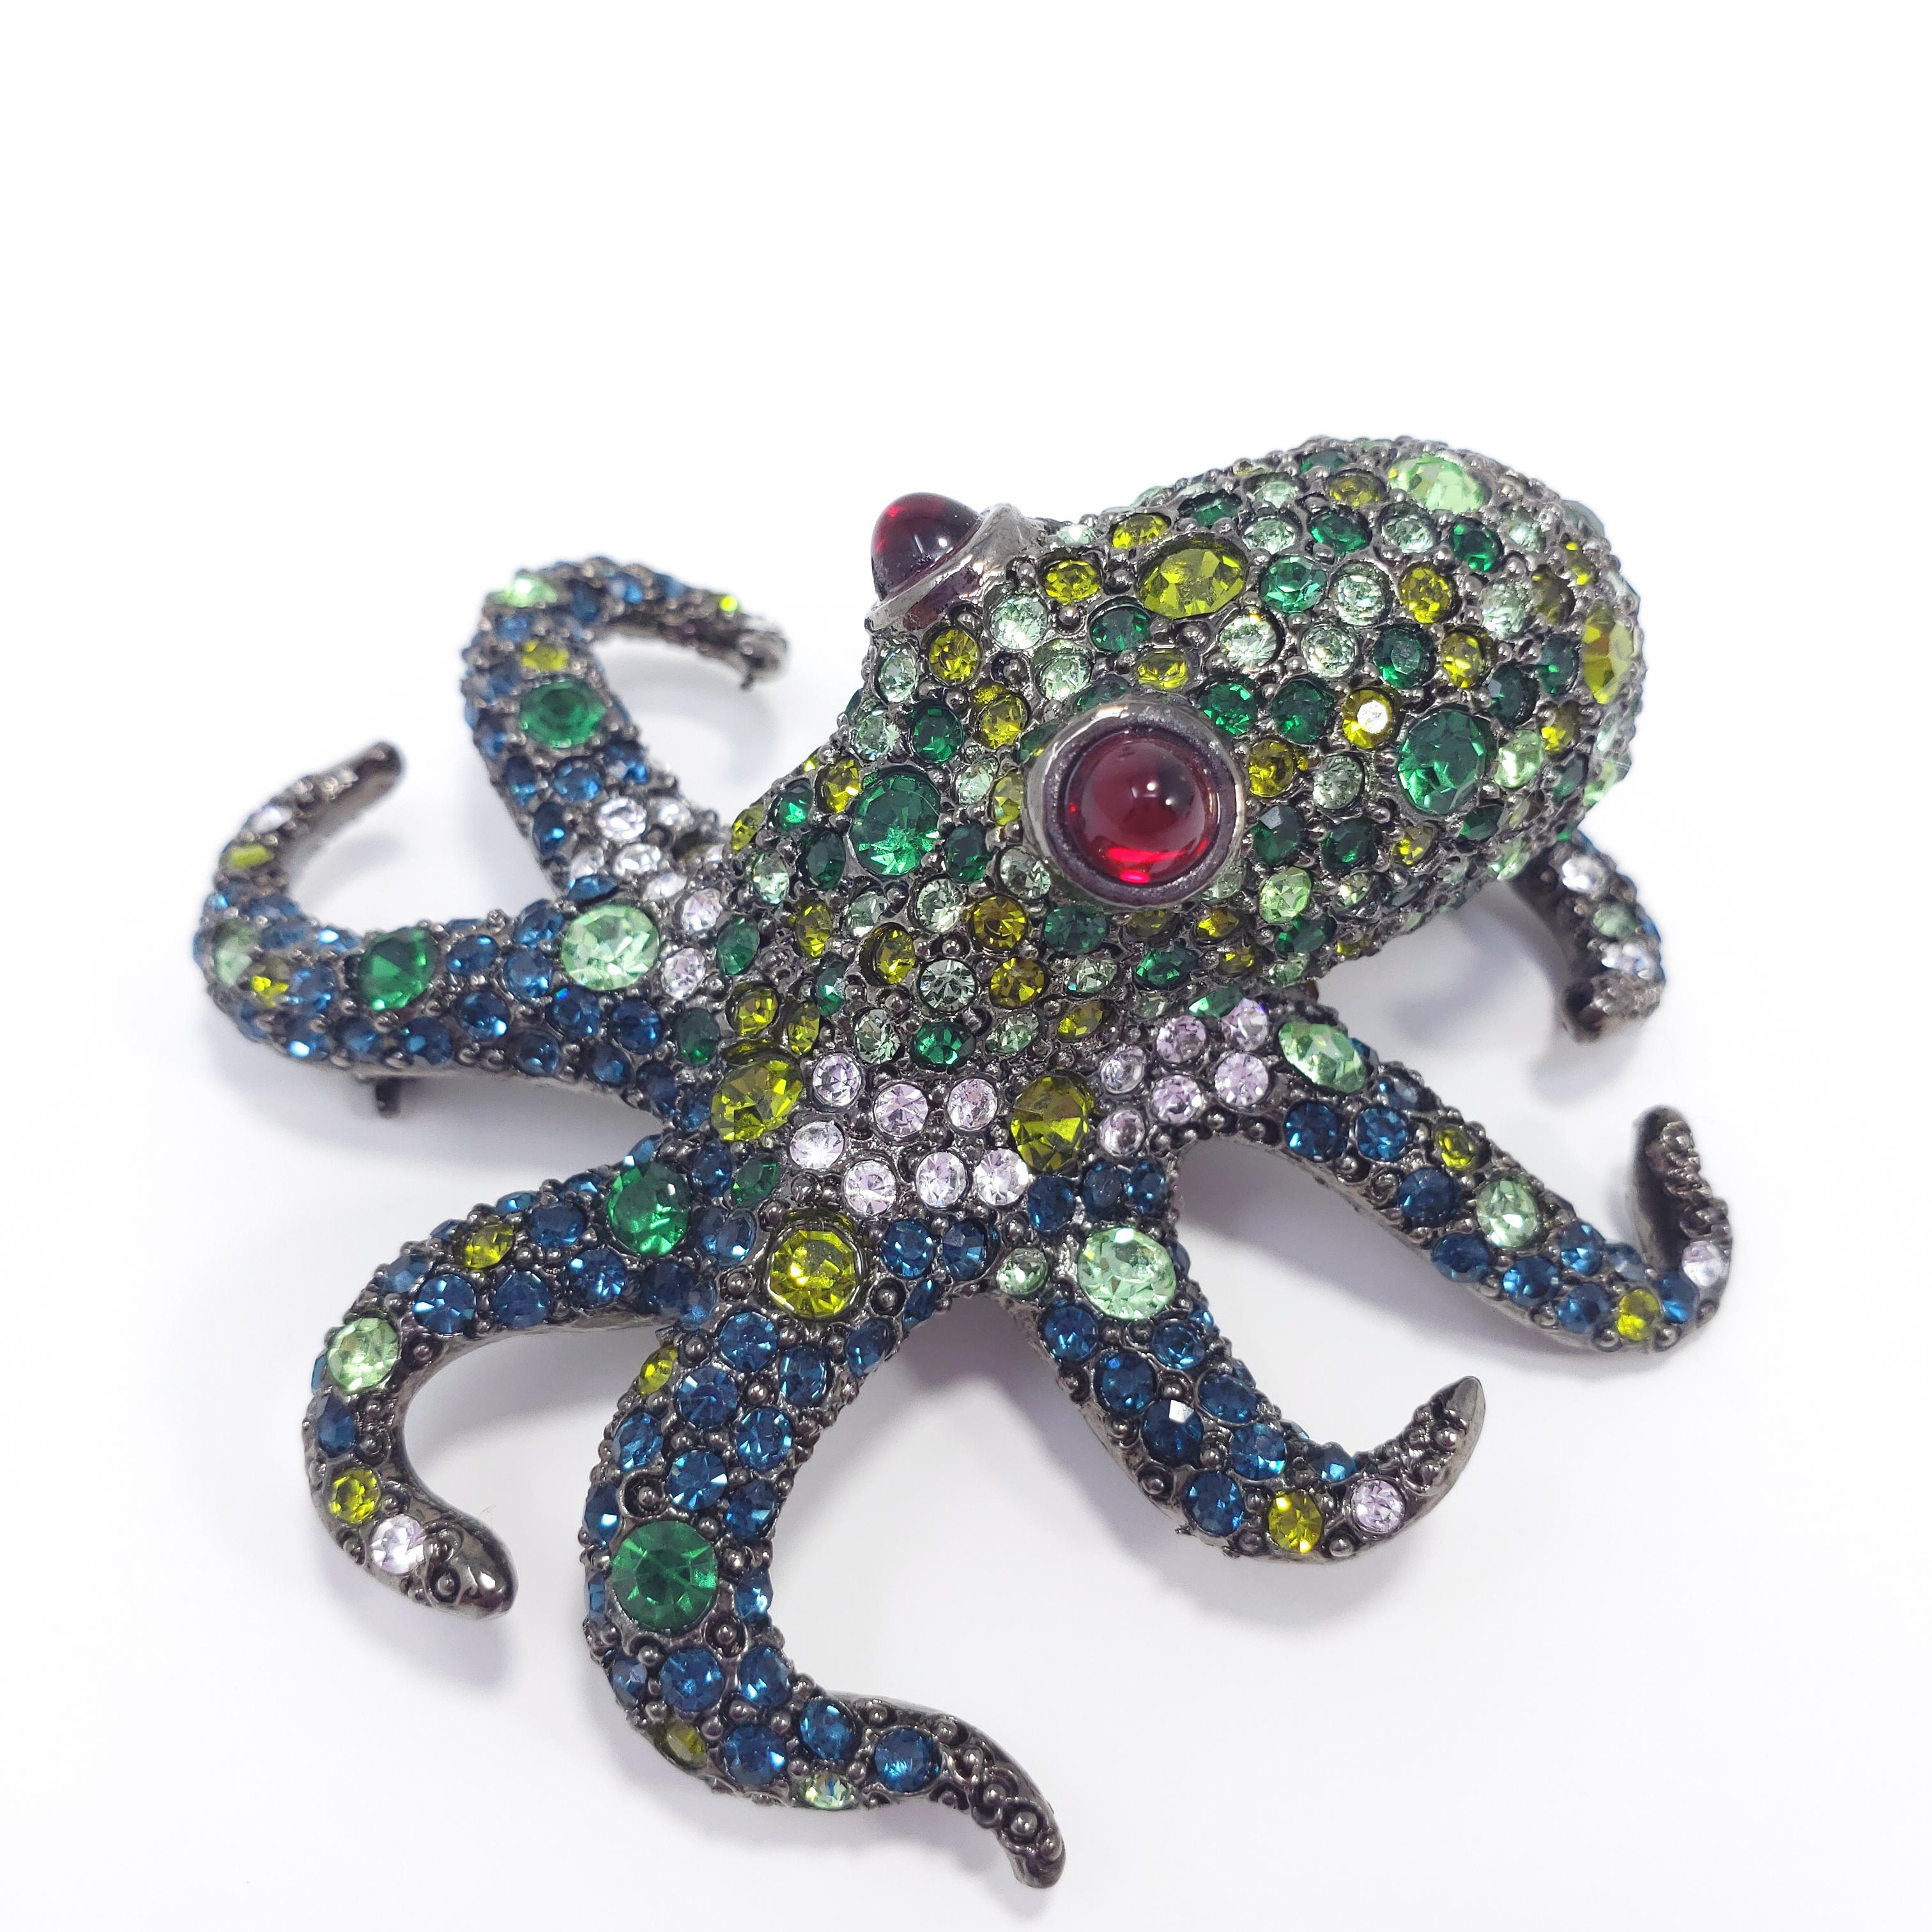 A gunmetal toned octopus decorated with pave crystals in shades of green, accented with two ruby-red cabochon eyes.

By Kenneth Jay Lane.
Hallmarks: Kenneth © Lane